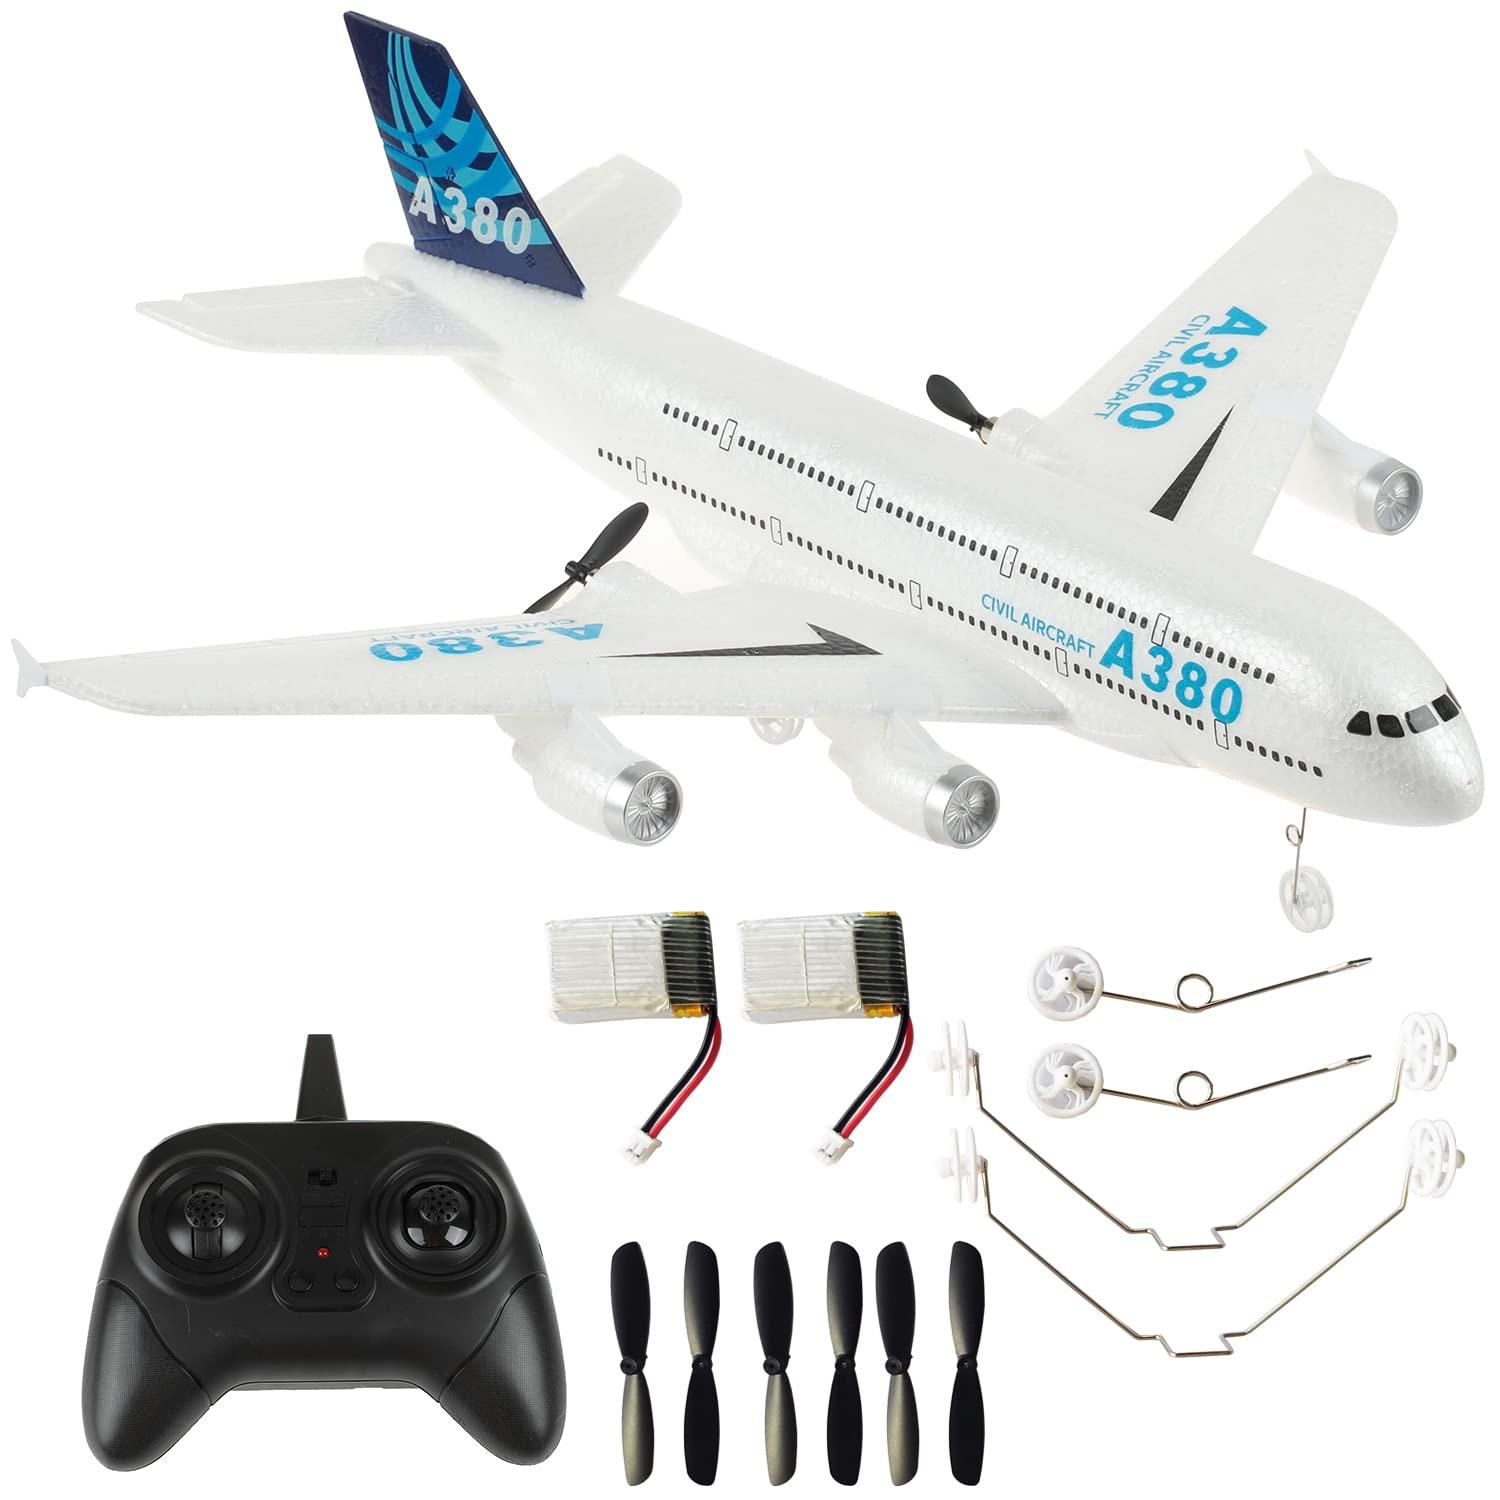 Rc Airbus A380 Amazon:  Durable, Lightweight, and Ready to Fly